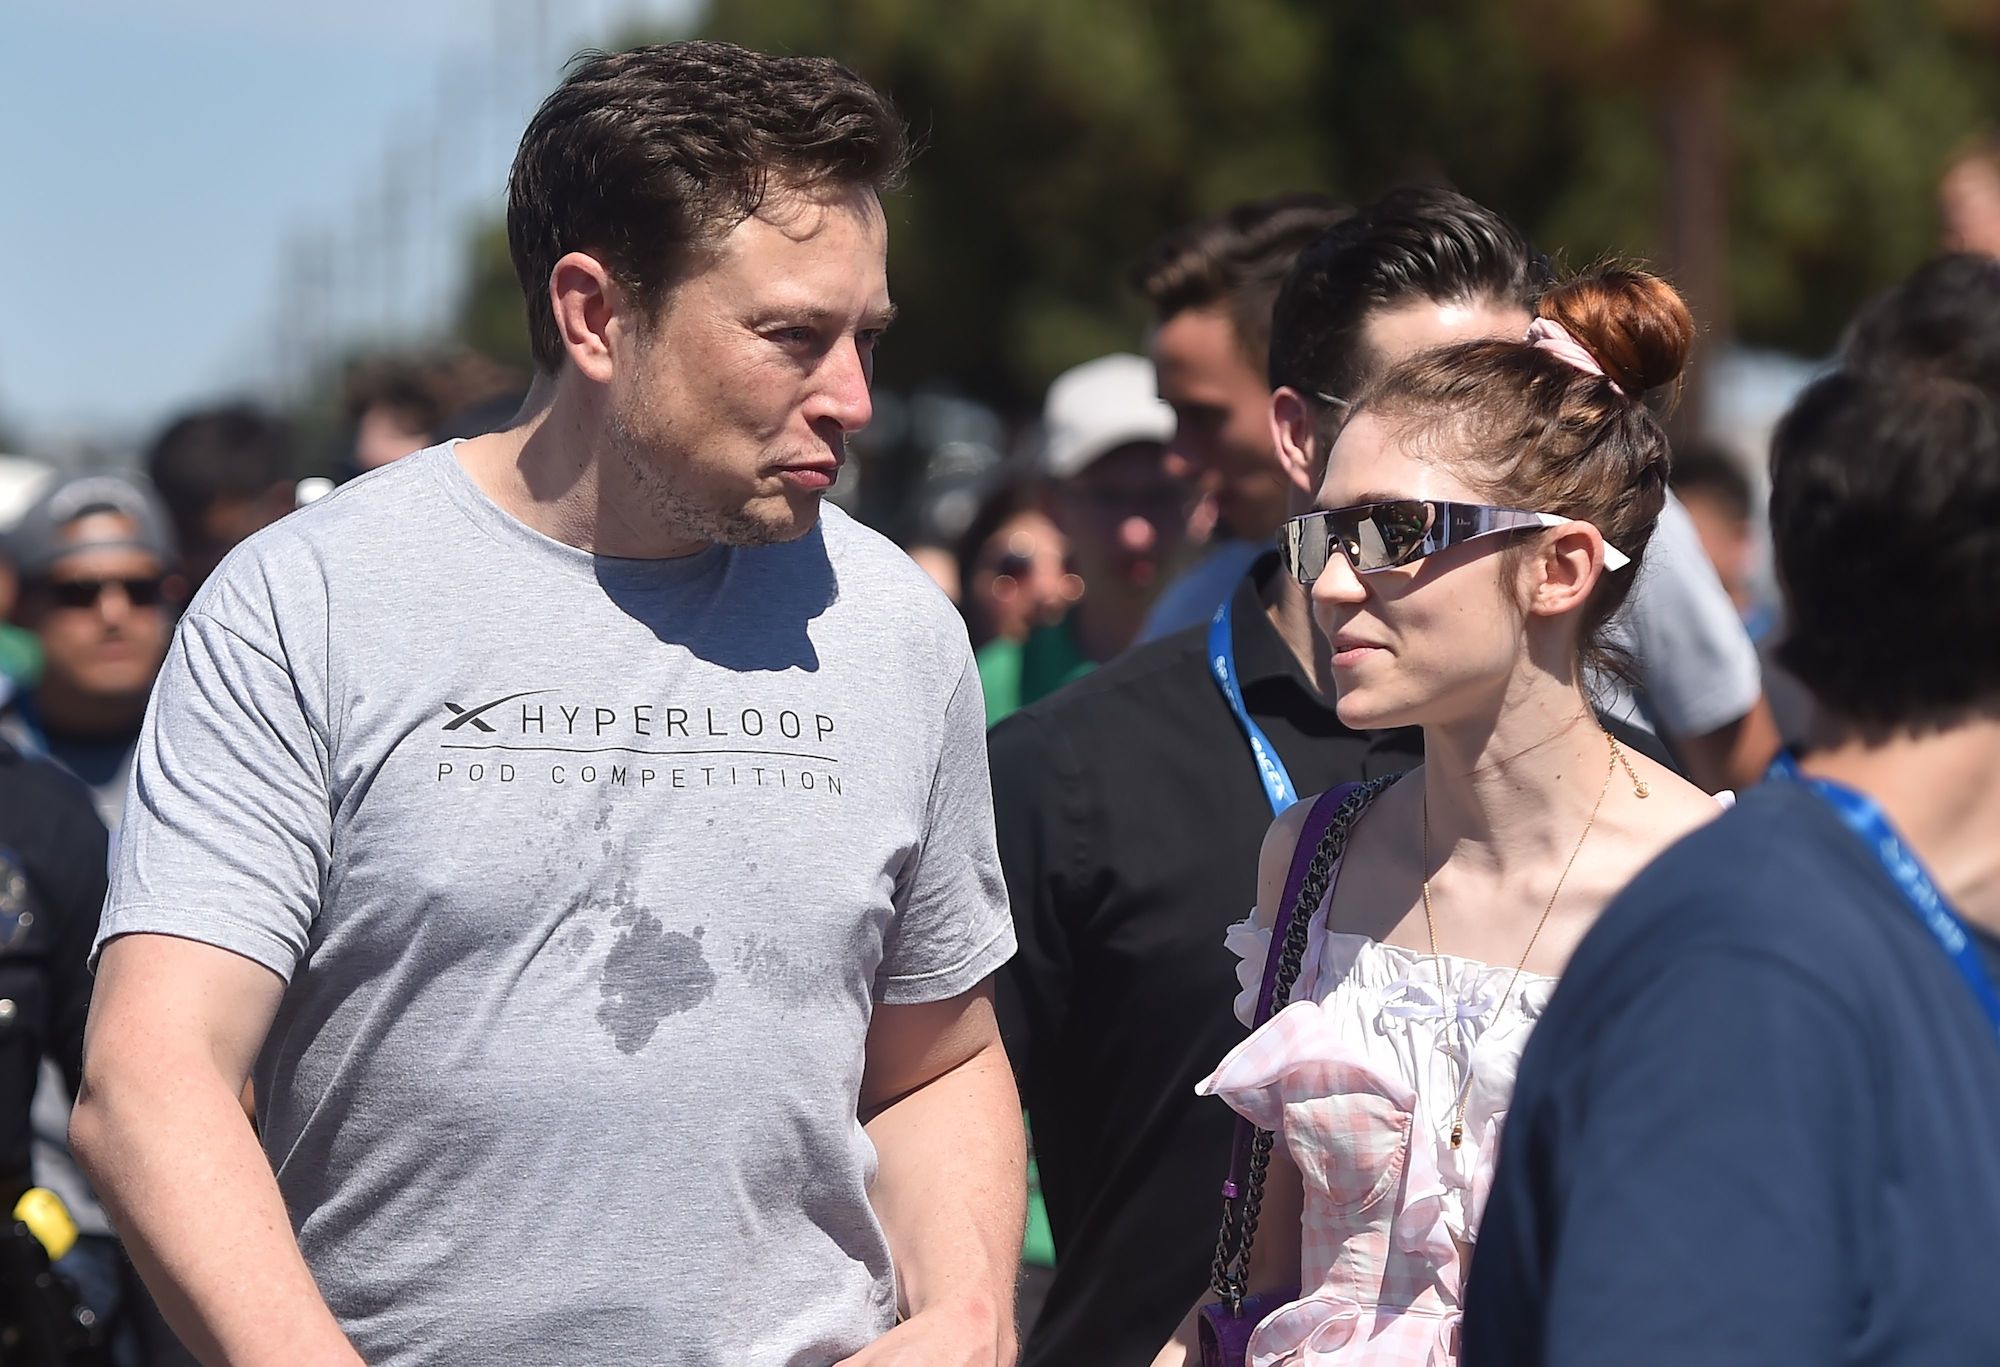 SpaceX founder Elon Musk (L) and Canadian musician Grimes (Claire Boucher) attend the 2018 Space X Hyperloop Pod Competition